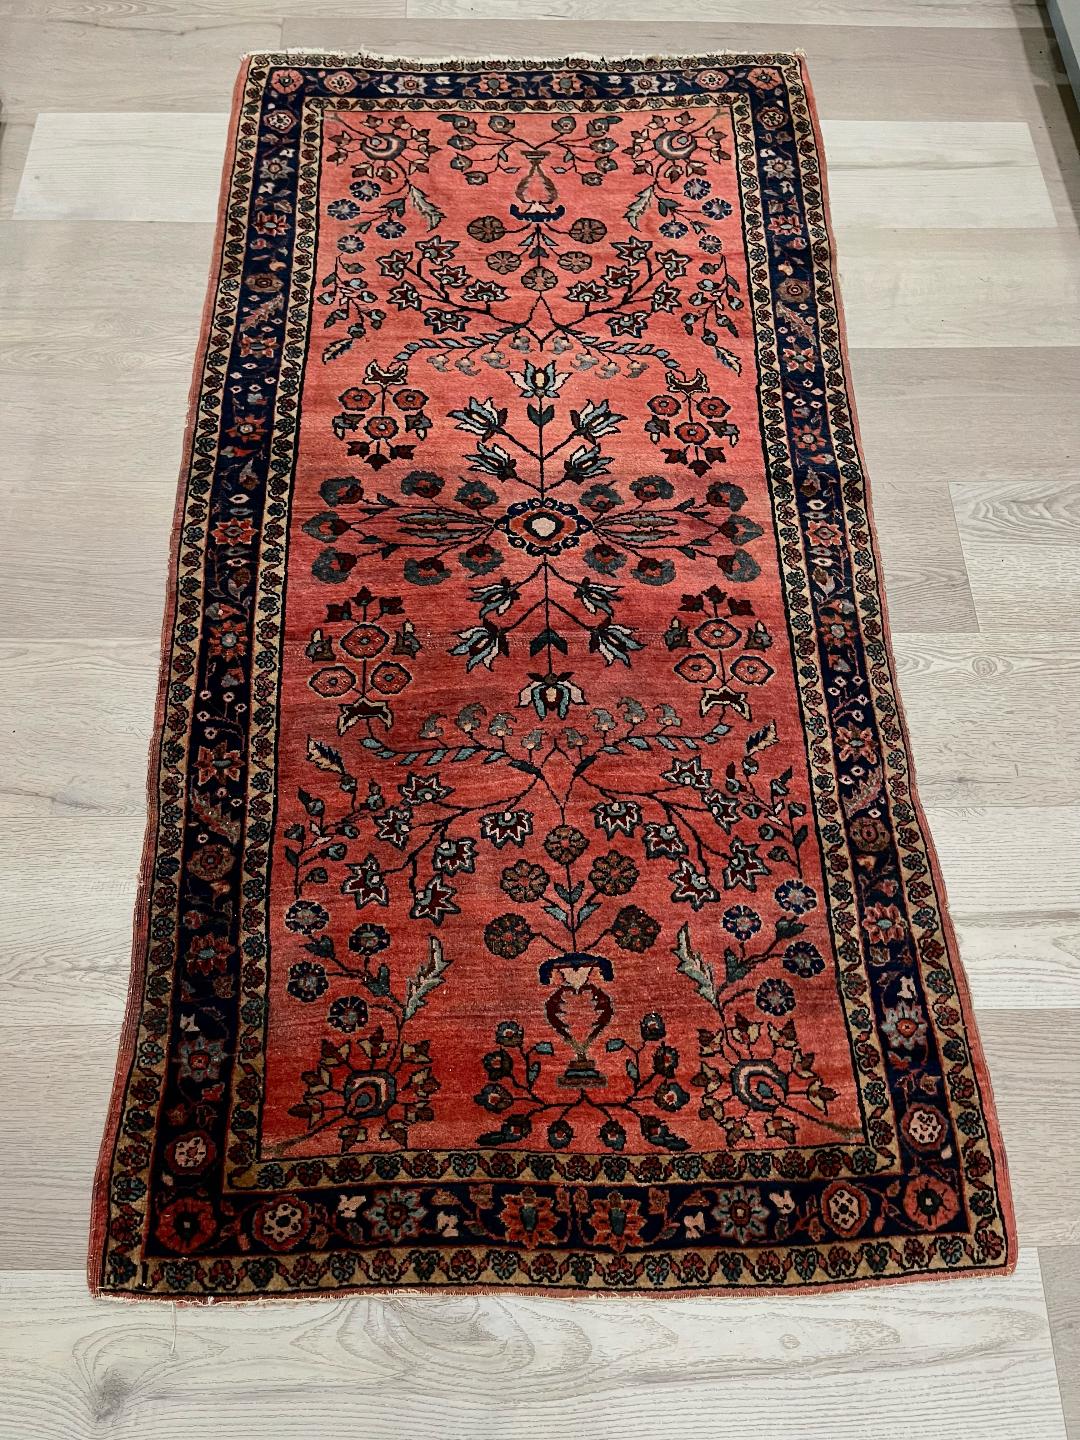 ANTIQUE AND FINELY HAND WOVEN SAROUK 3ba106